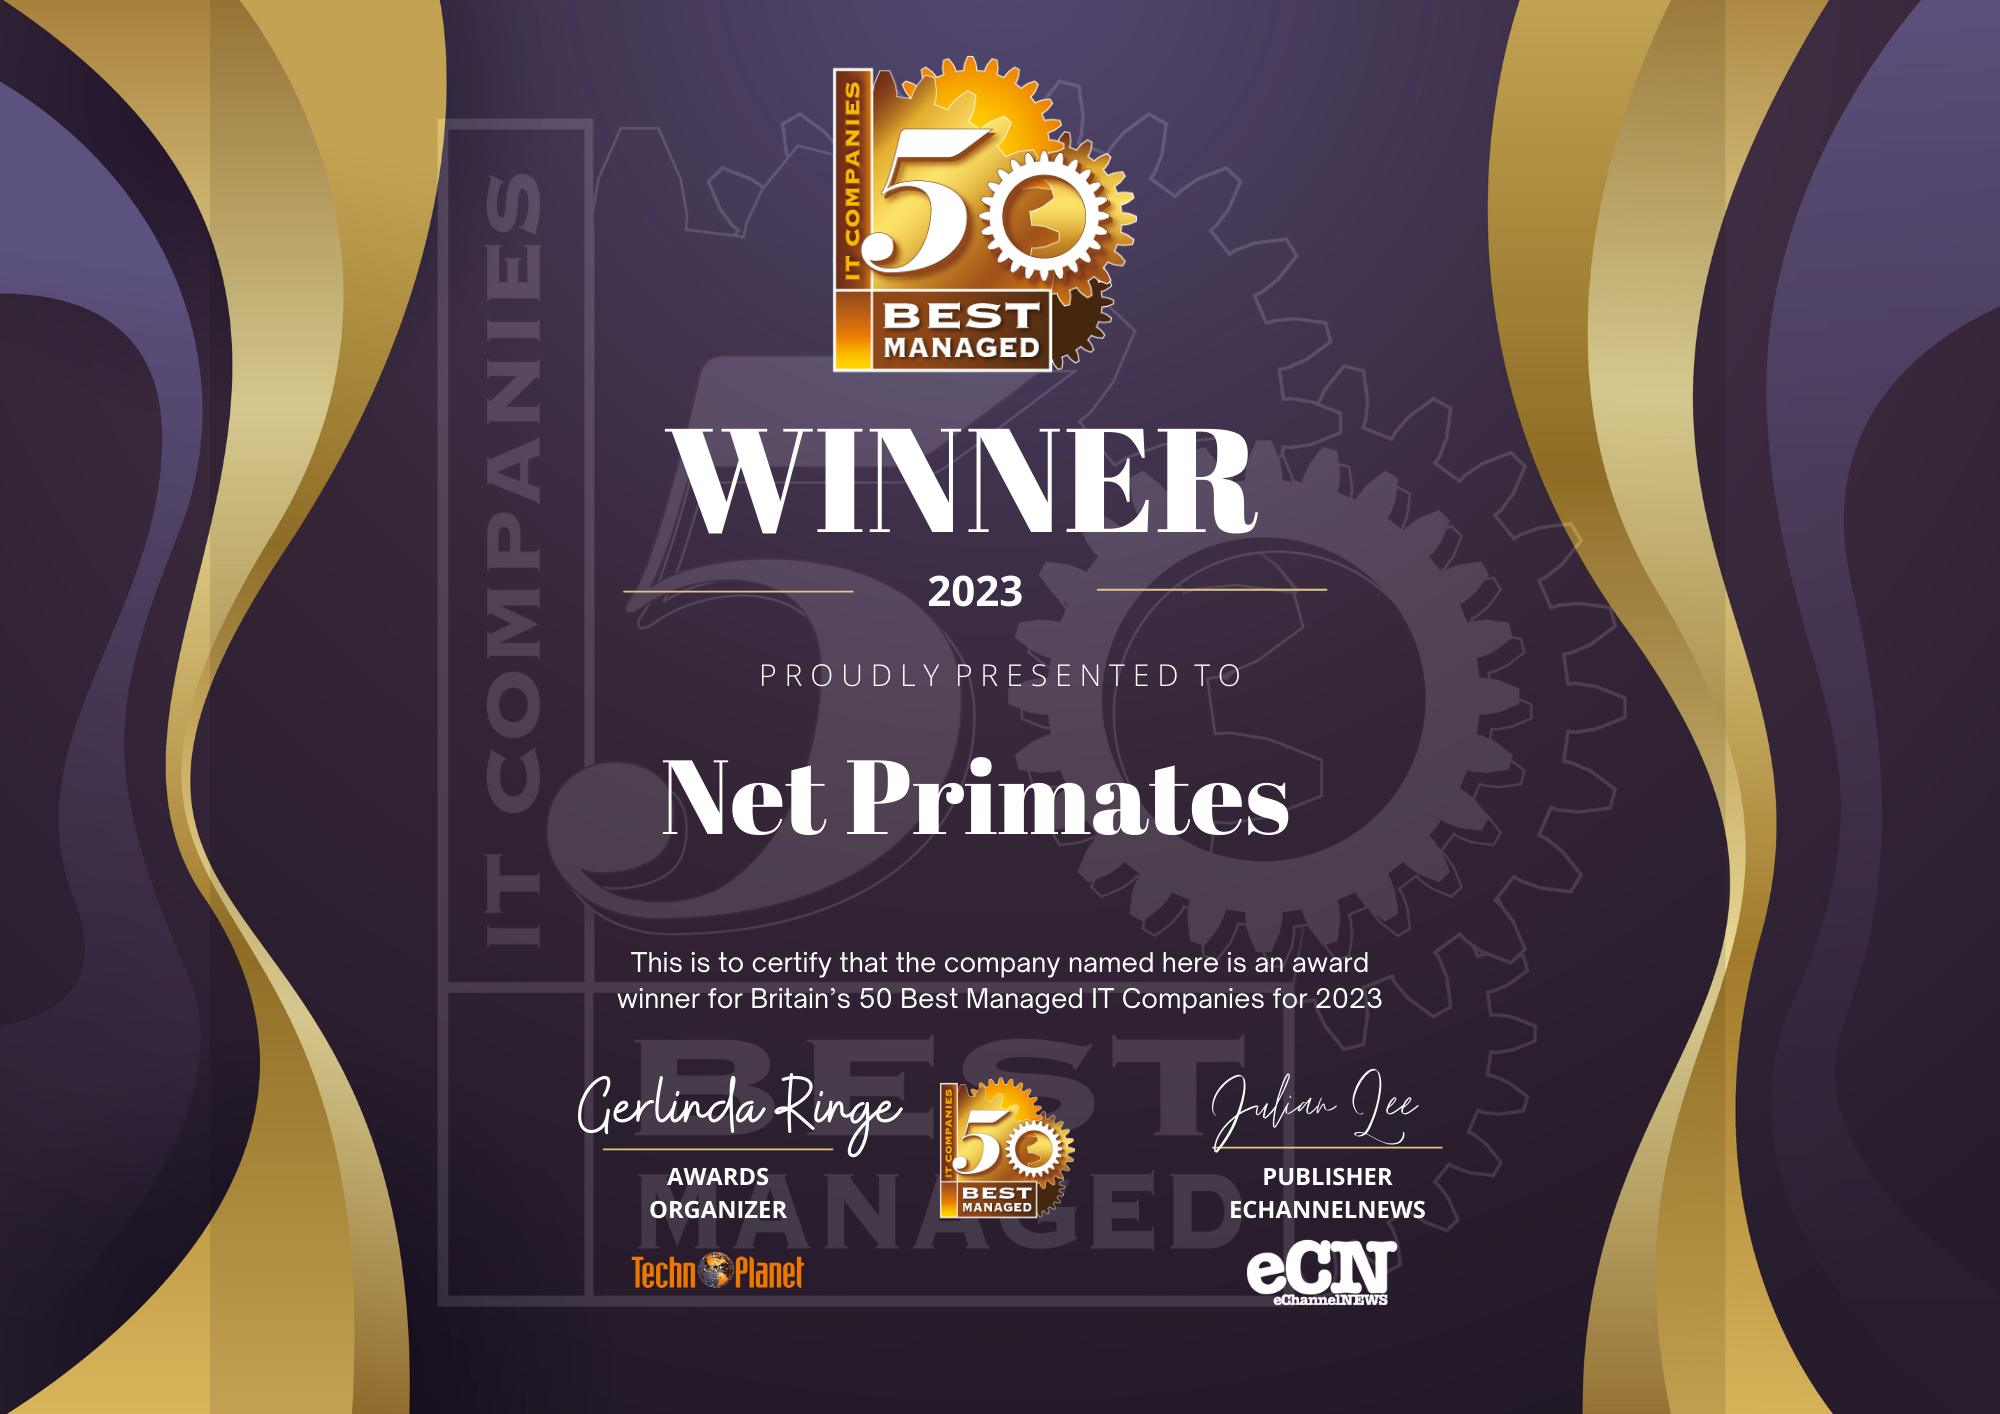 Net Primates triumphs with top IT award!